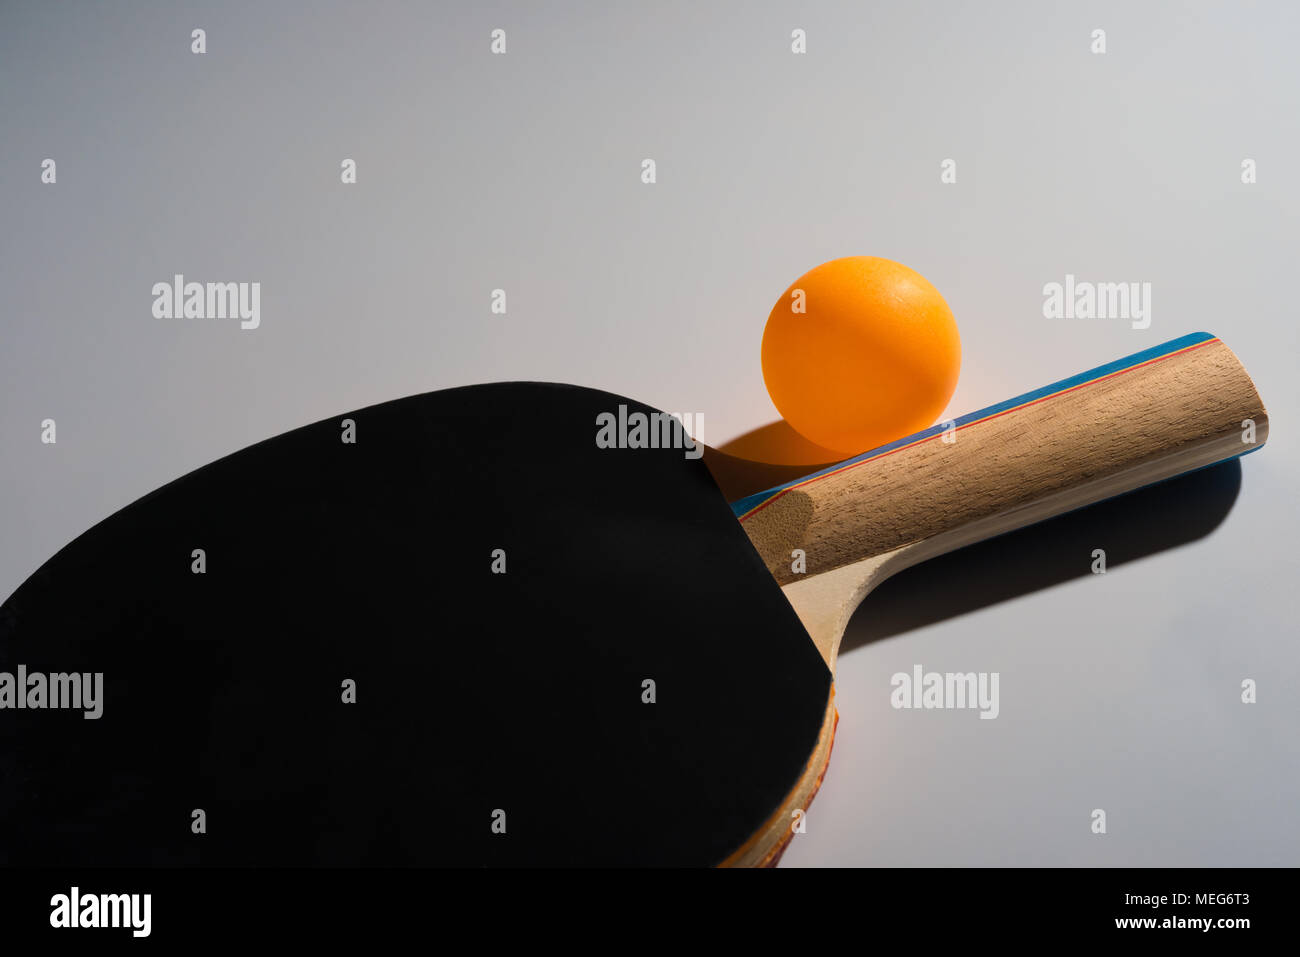 pingpong rackets and ball on a grey background Stock Photo